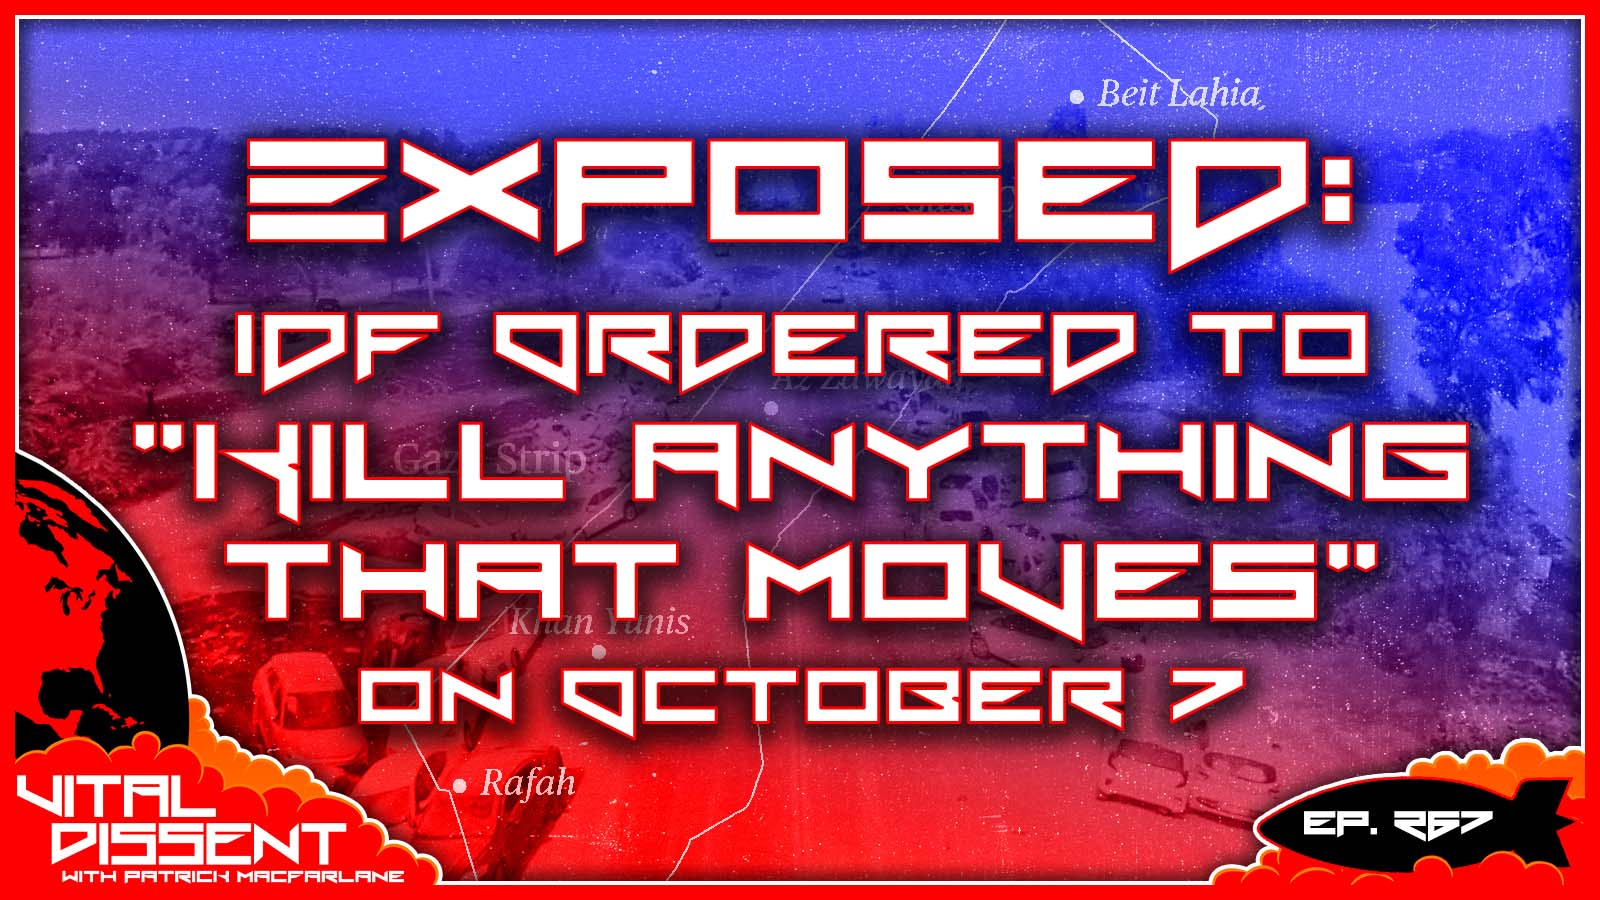 Exposed: IDF Ordered to “Kill Anything that Moves” on October 7 Ep. 267